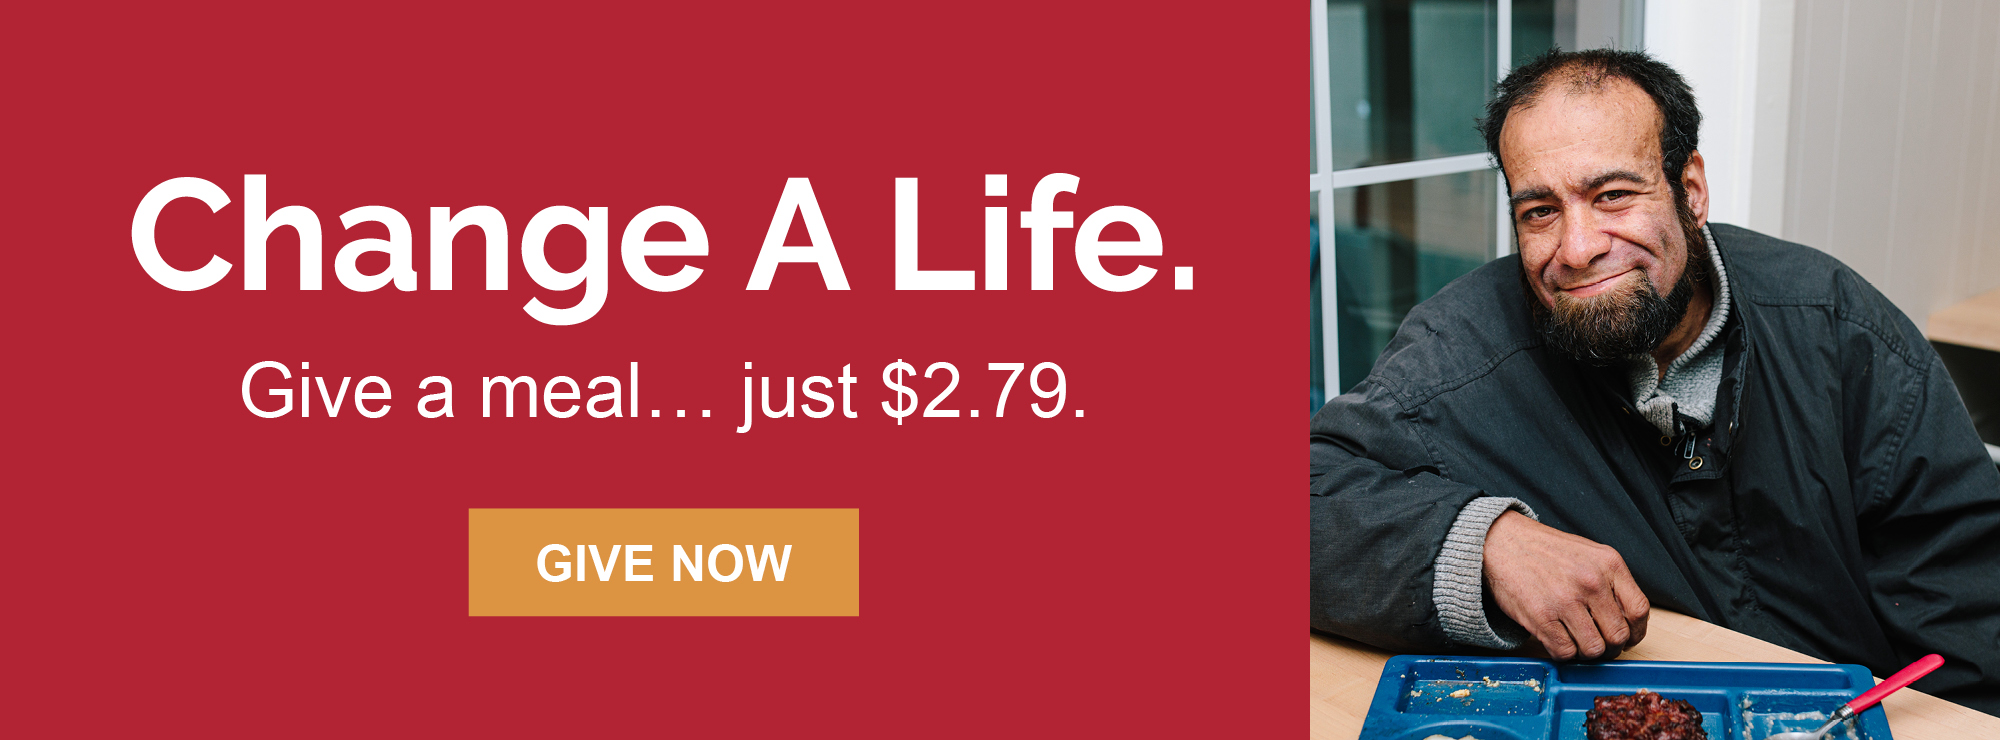 You can change a life. Give a meal, just $2.79.